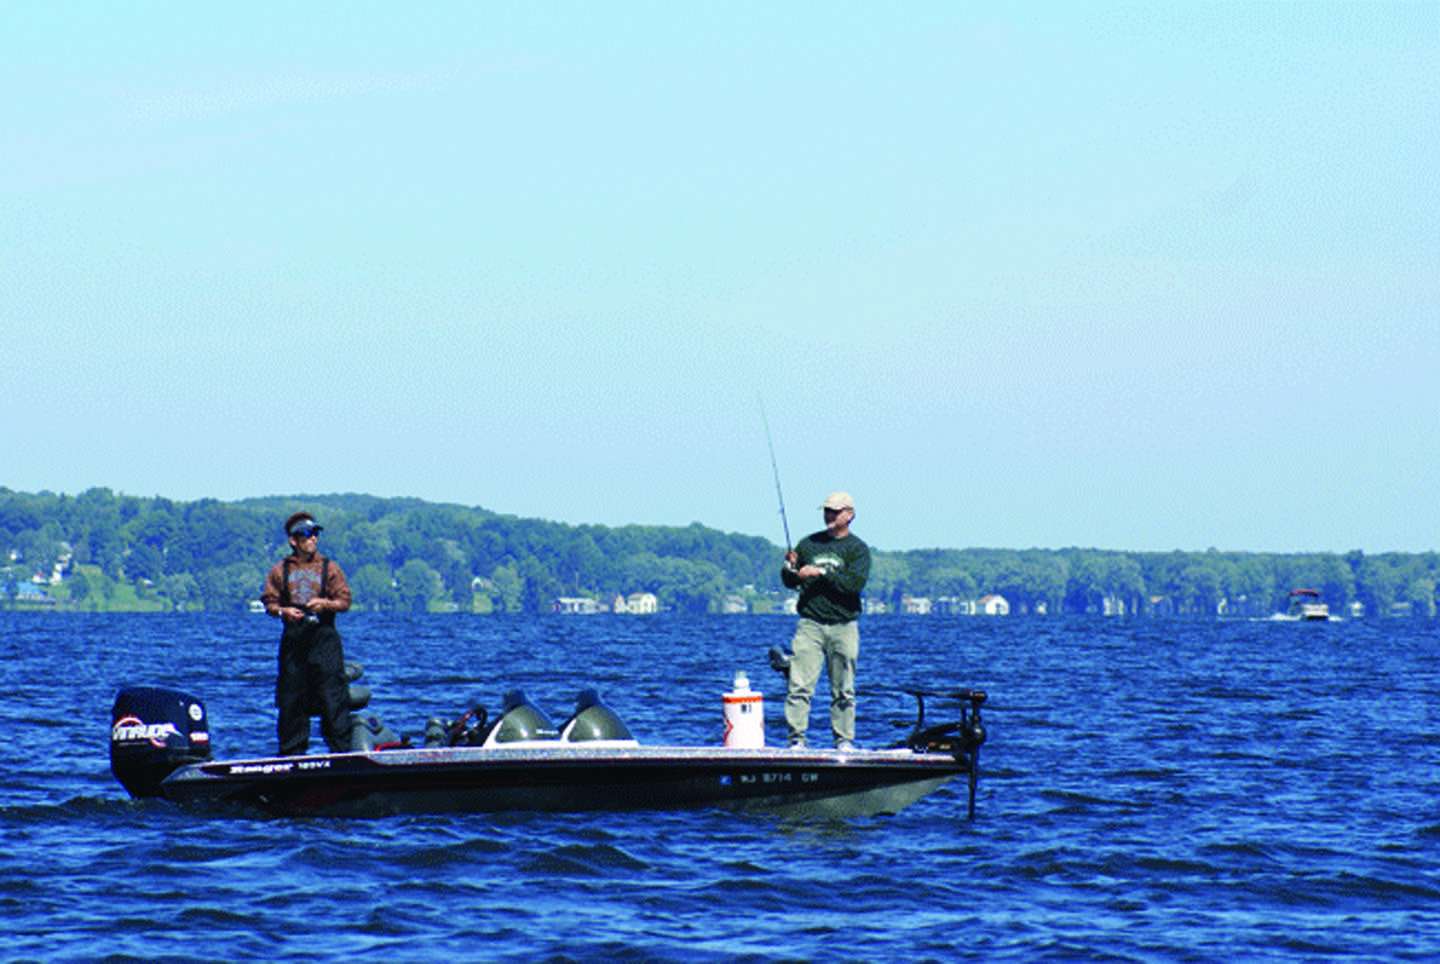 <b>Chautauqua Lake</b><br>  In the very southwest corner of New York lies lonely 13,000-acre Chautauqua Lake, which teams with sizeable largemouth and smallmouth bass. Both species have been taken here that weigh over 7 pounds. Relatively shallow with a maximum depth of 78 feet, Chautauqua is separated into two basins. Most of the lower basin is less than 20 feet deep. The abundant aquatic vegetation in both basins gives the largemouth plenty of cover to call home. Smallmouth frequent the sparser weed beds, the deep edges of submerged weeds beds and sand and rocky flats and drop-offs.